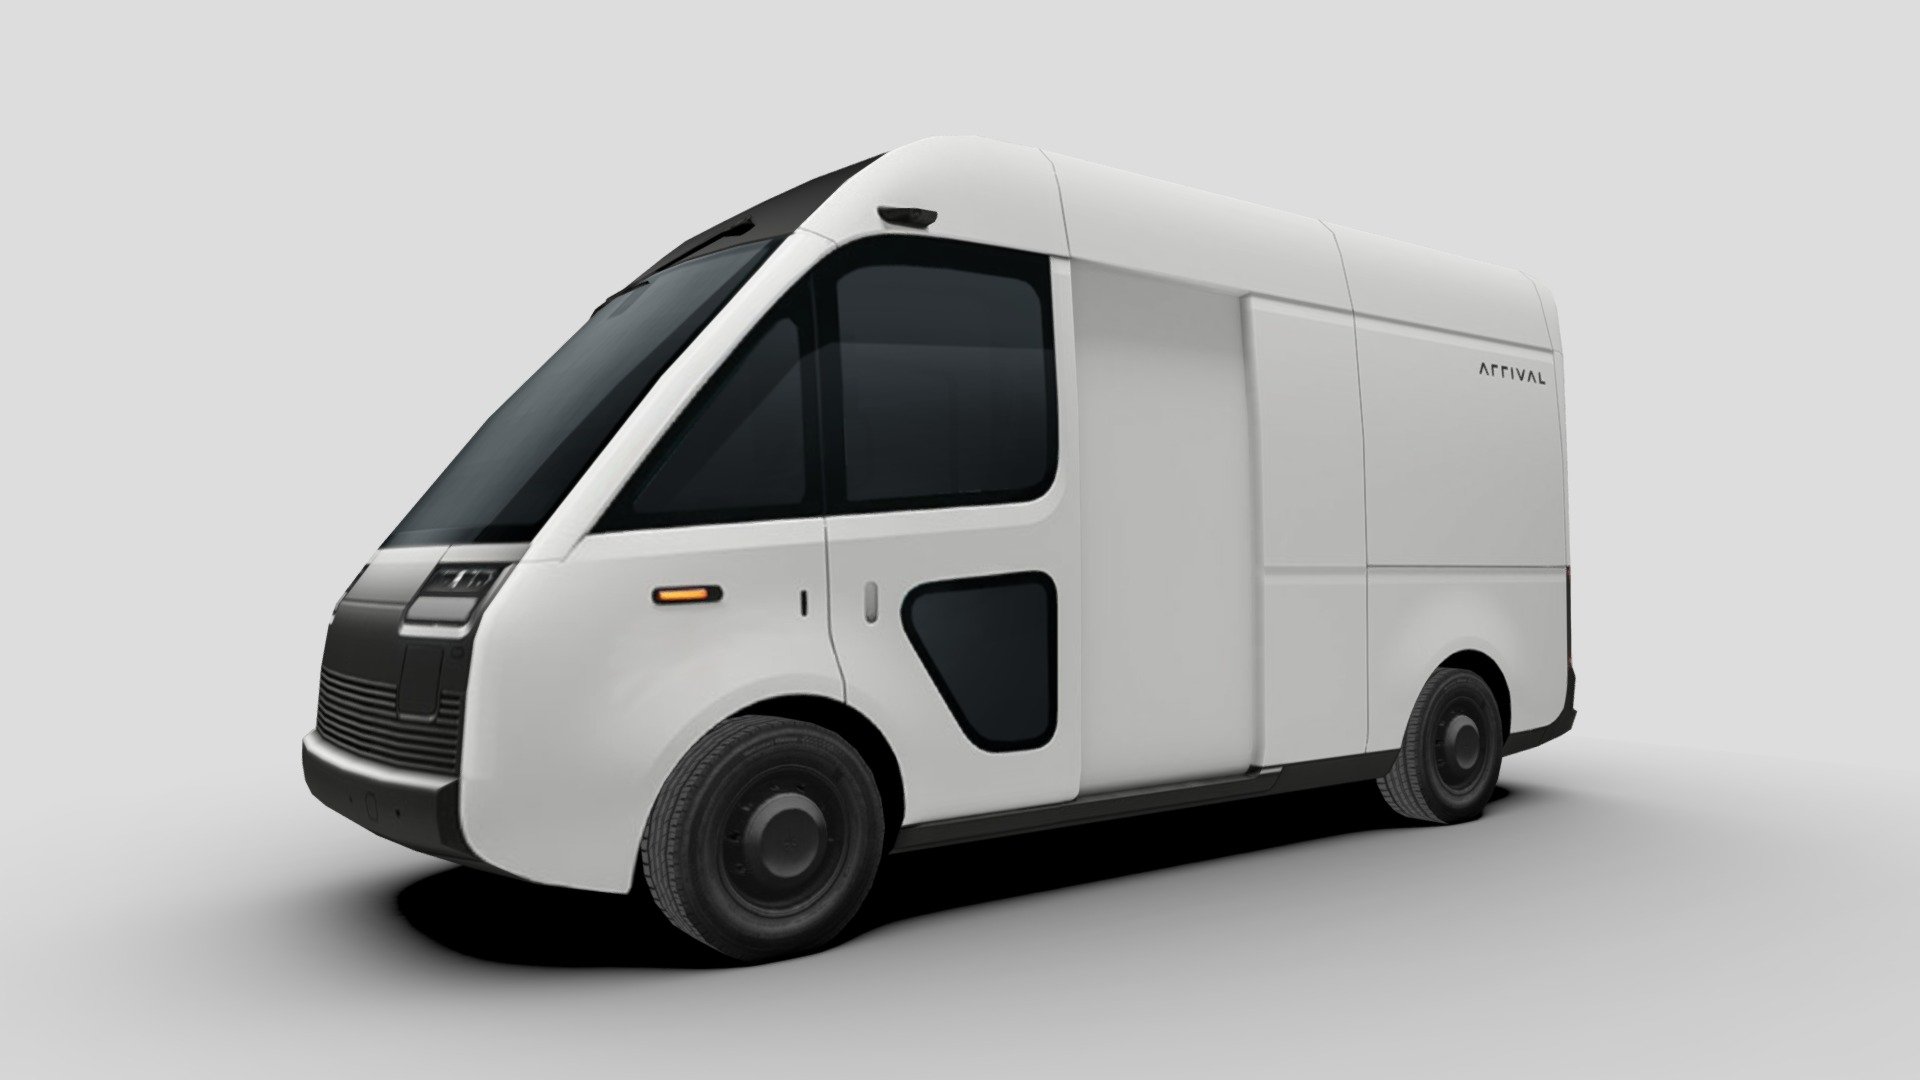 3d model of the 2024 Arrival Van, a battery electric cargo van

The model is very low-poly, full-scale, real photos texture (single 2048 x 2048 png).

Package includes 5 file formats and texture (3ds, fbx, dae, obj and skp)

Hope you enjoy it.

José Bronze - Arrival van 2024 - Buy Royalty Free 3D model by Jose Bronze (@pinceladas3d) 3d model